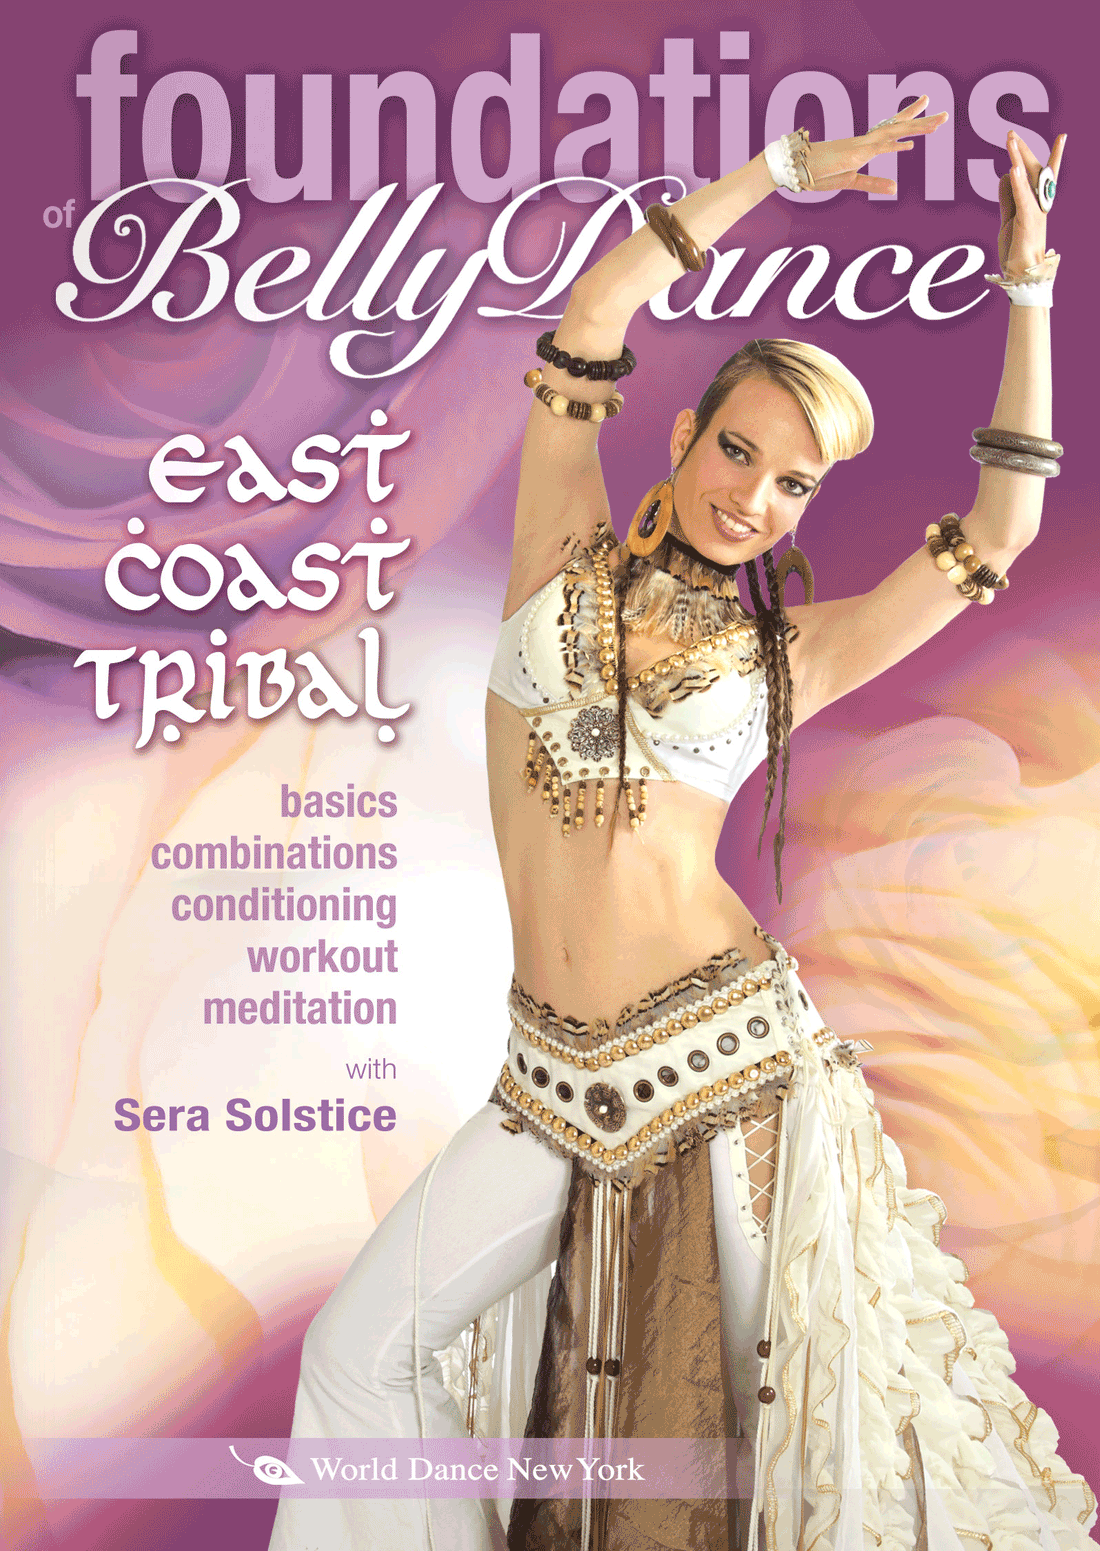 Foundations of Belly Dance: East Coast Tribal, Sera Solstice - INSTANT VIDEO / DVD - World Dance New York